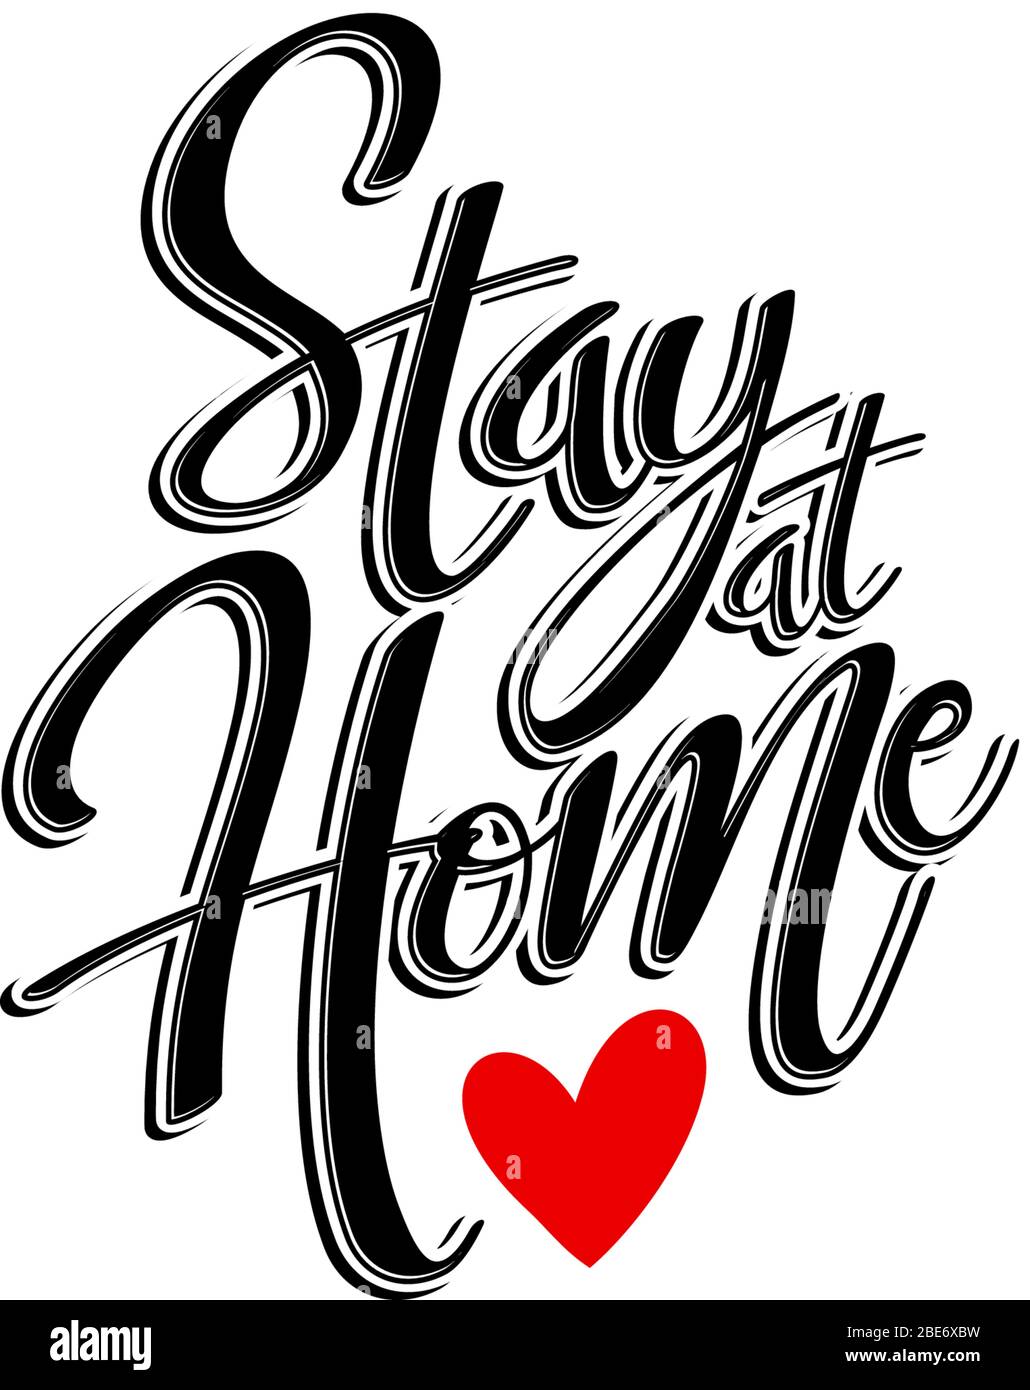 Stay at Home quote in black with red heart. isolated on white background. Social distancing campaign during quarentine coronavirus pandemic Stock Vector